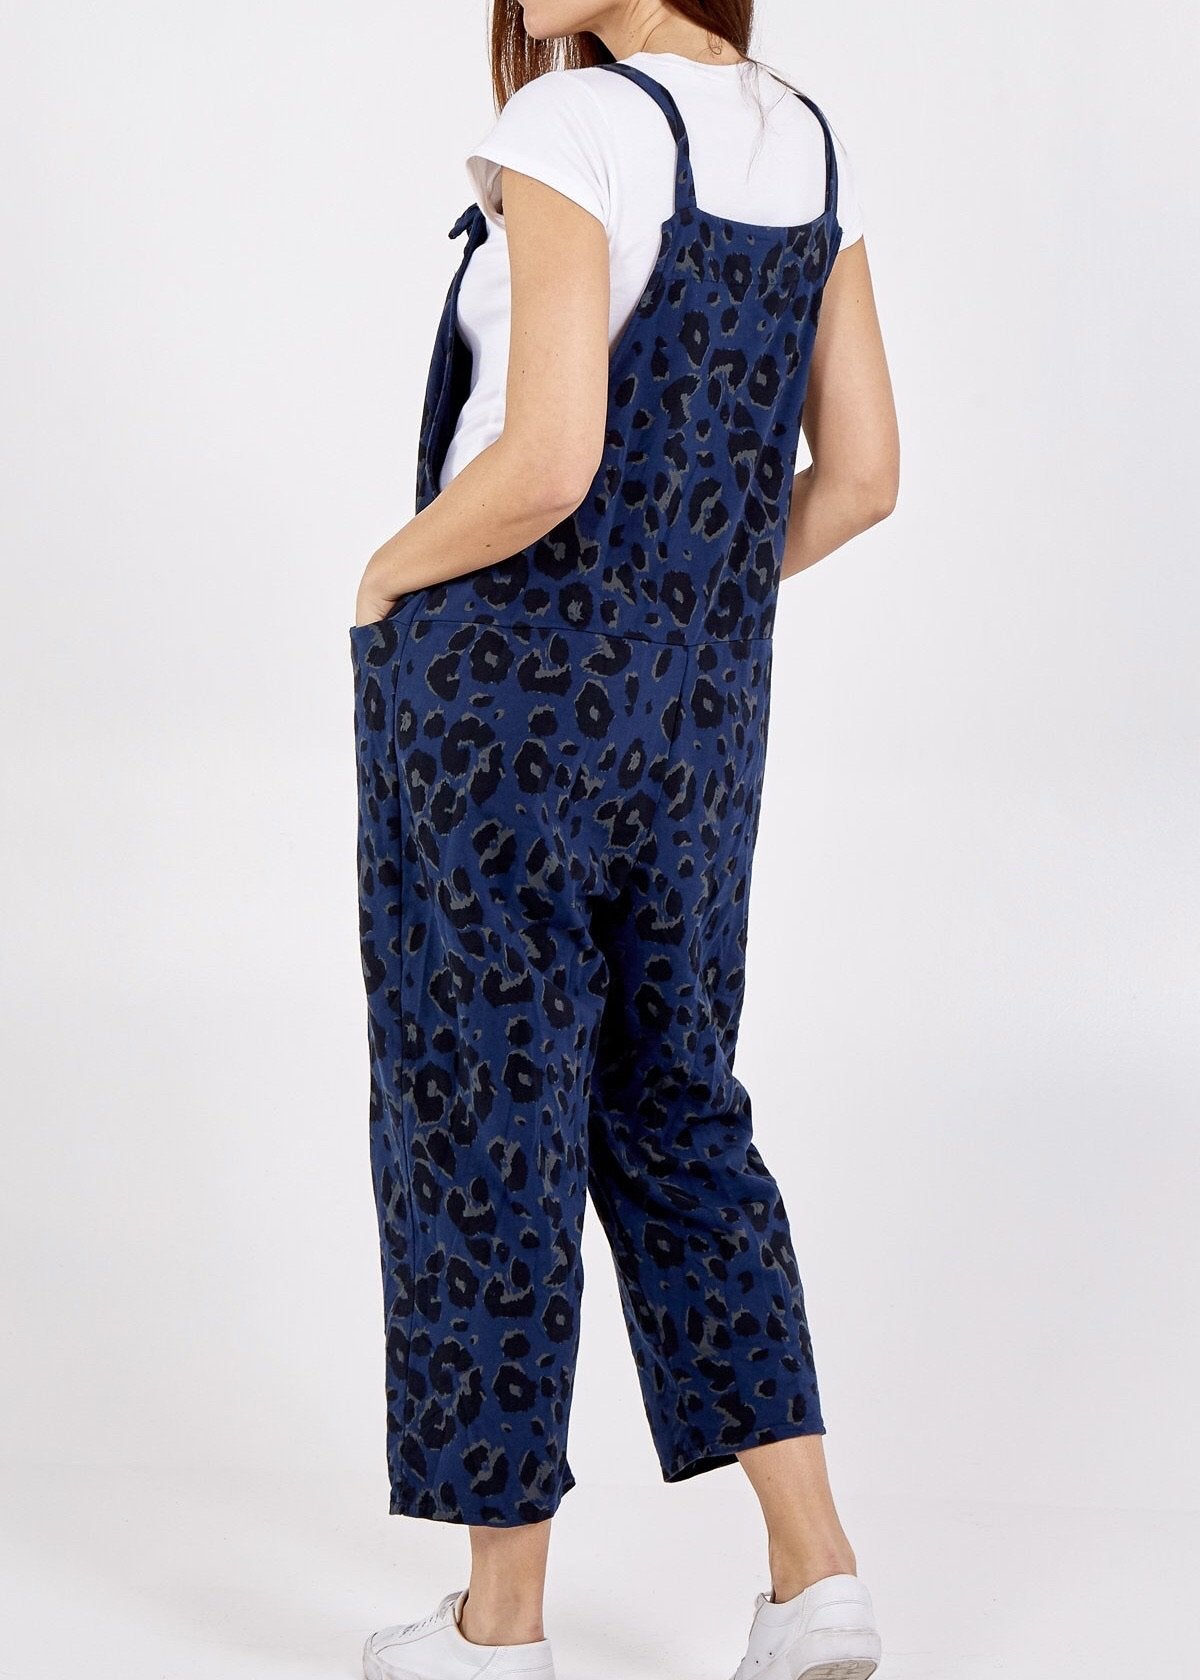 Showing the back of the Porthleven Dungarees in navy with a leopard print pattern 